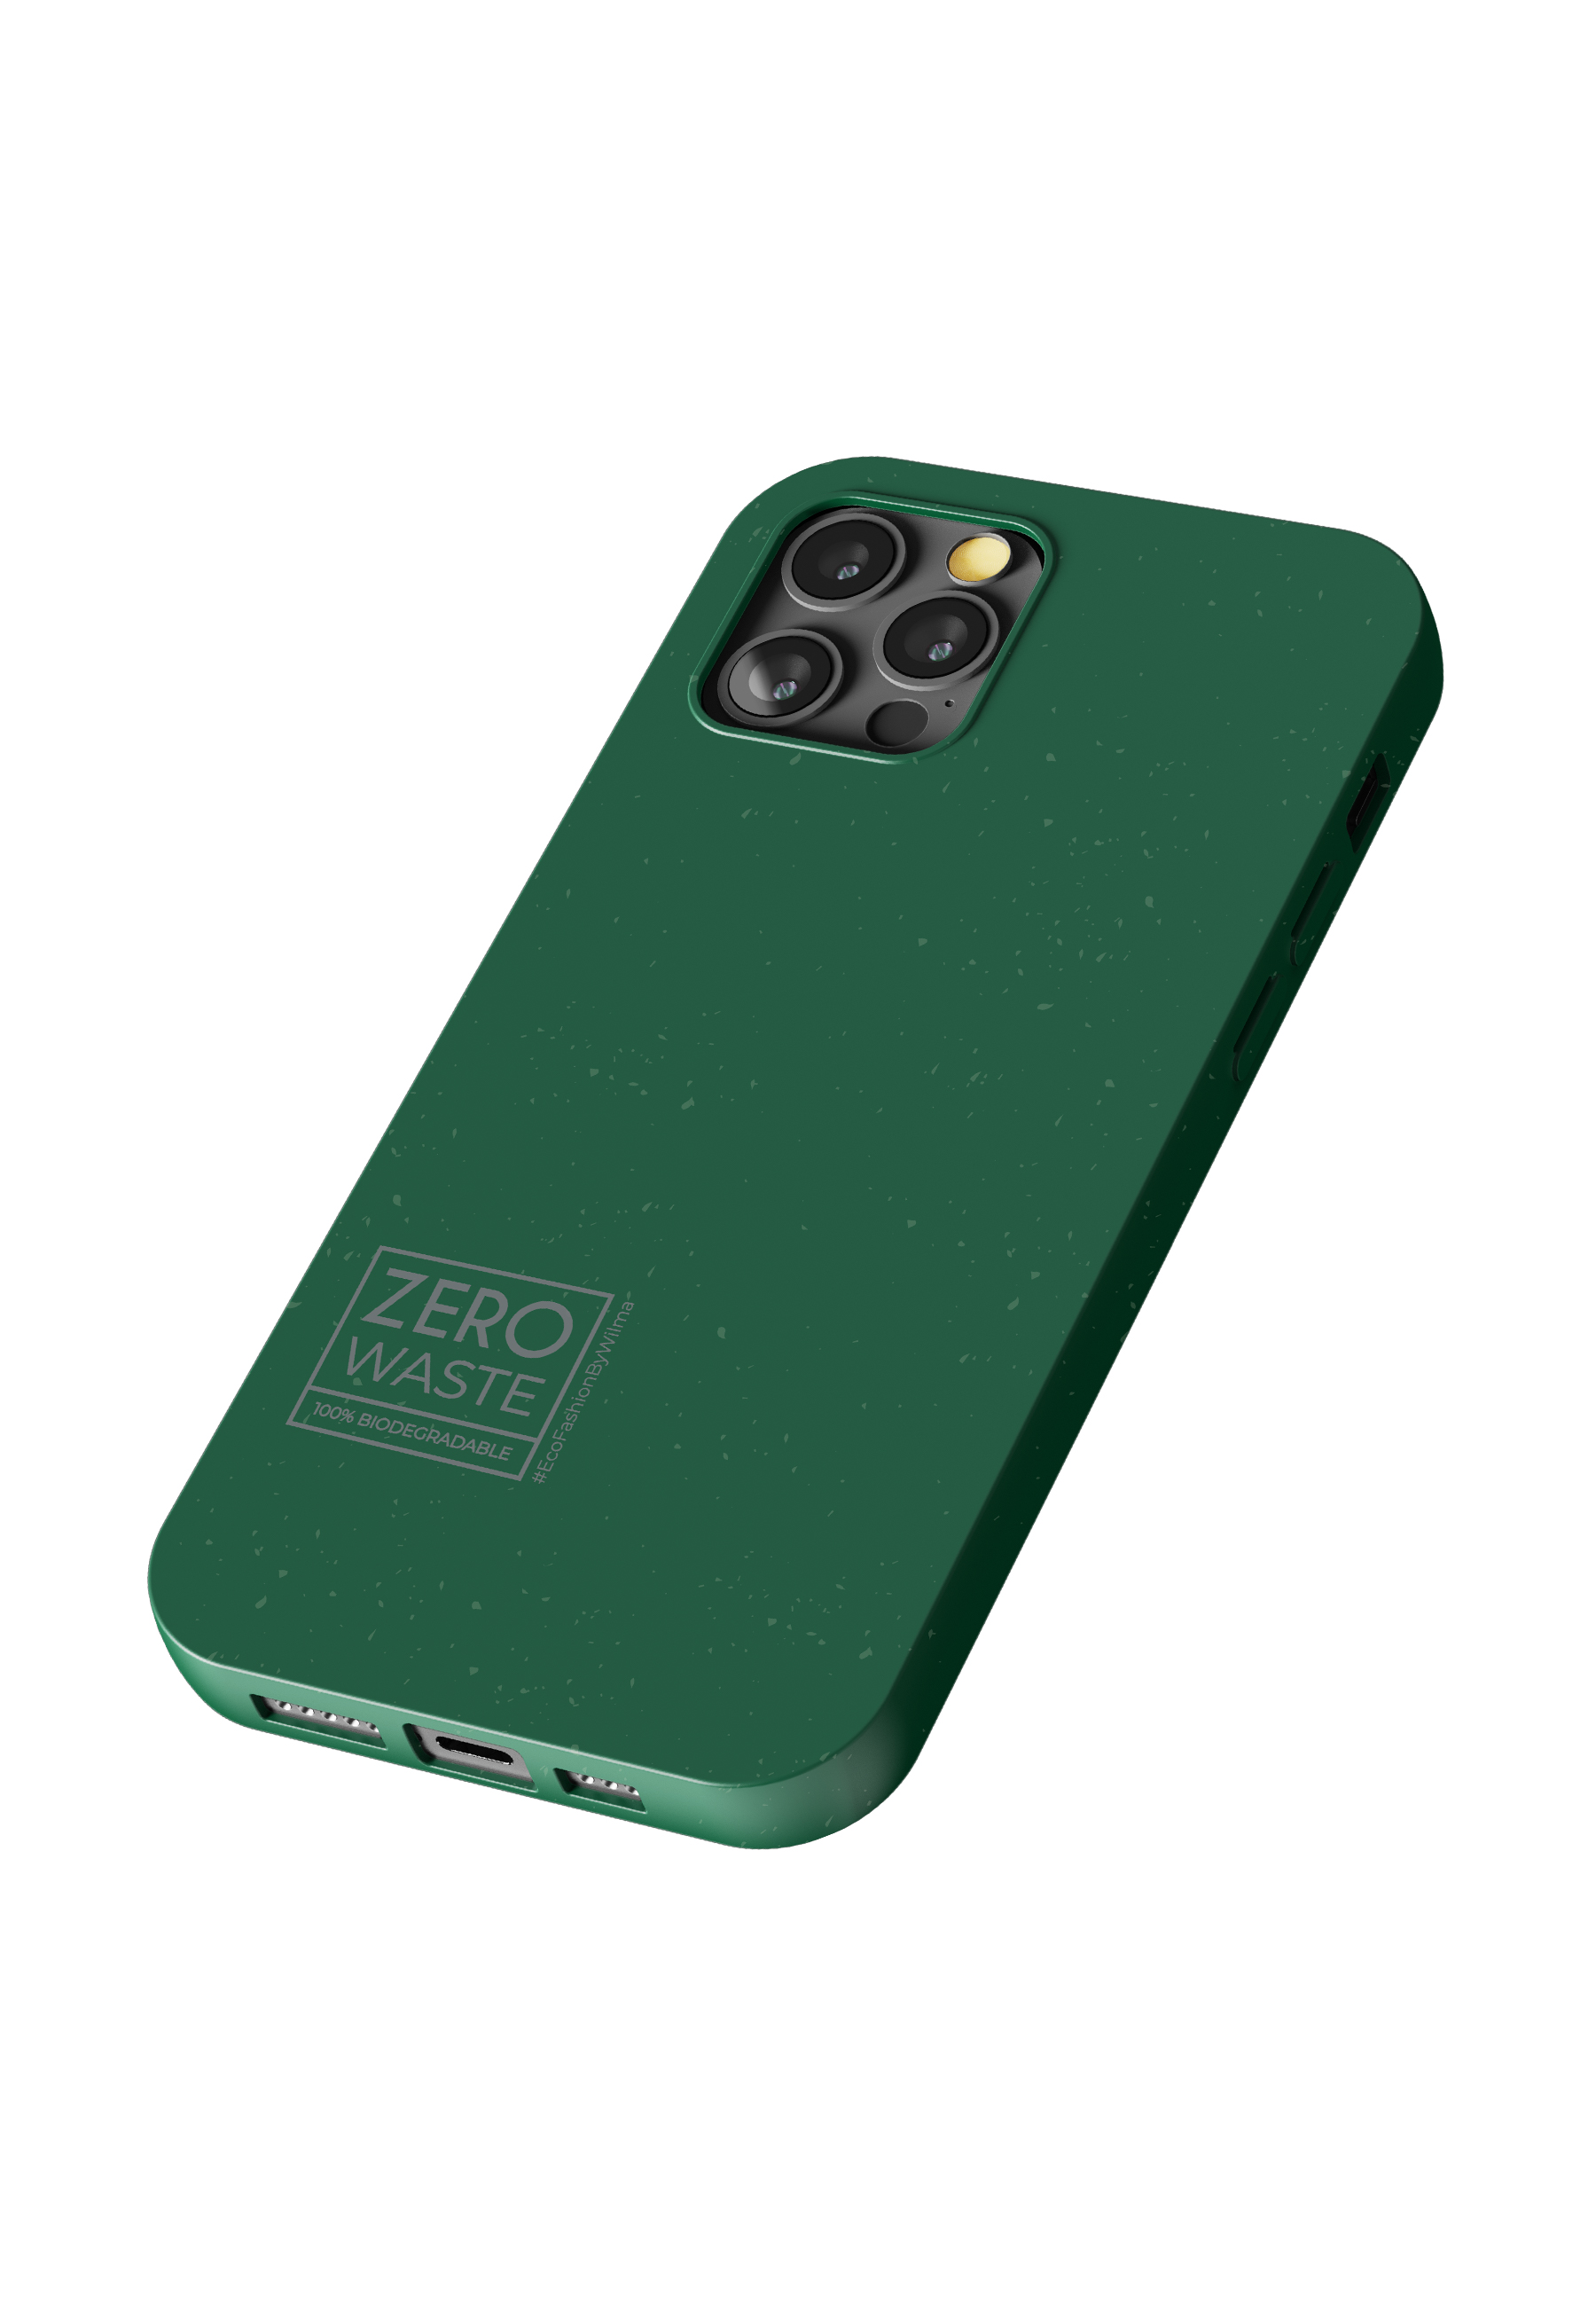 BY iPhone ECO FASHION Apple, WILMA Pro Max, Backcover, P12PM, 12 green